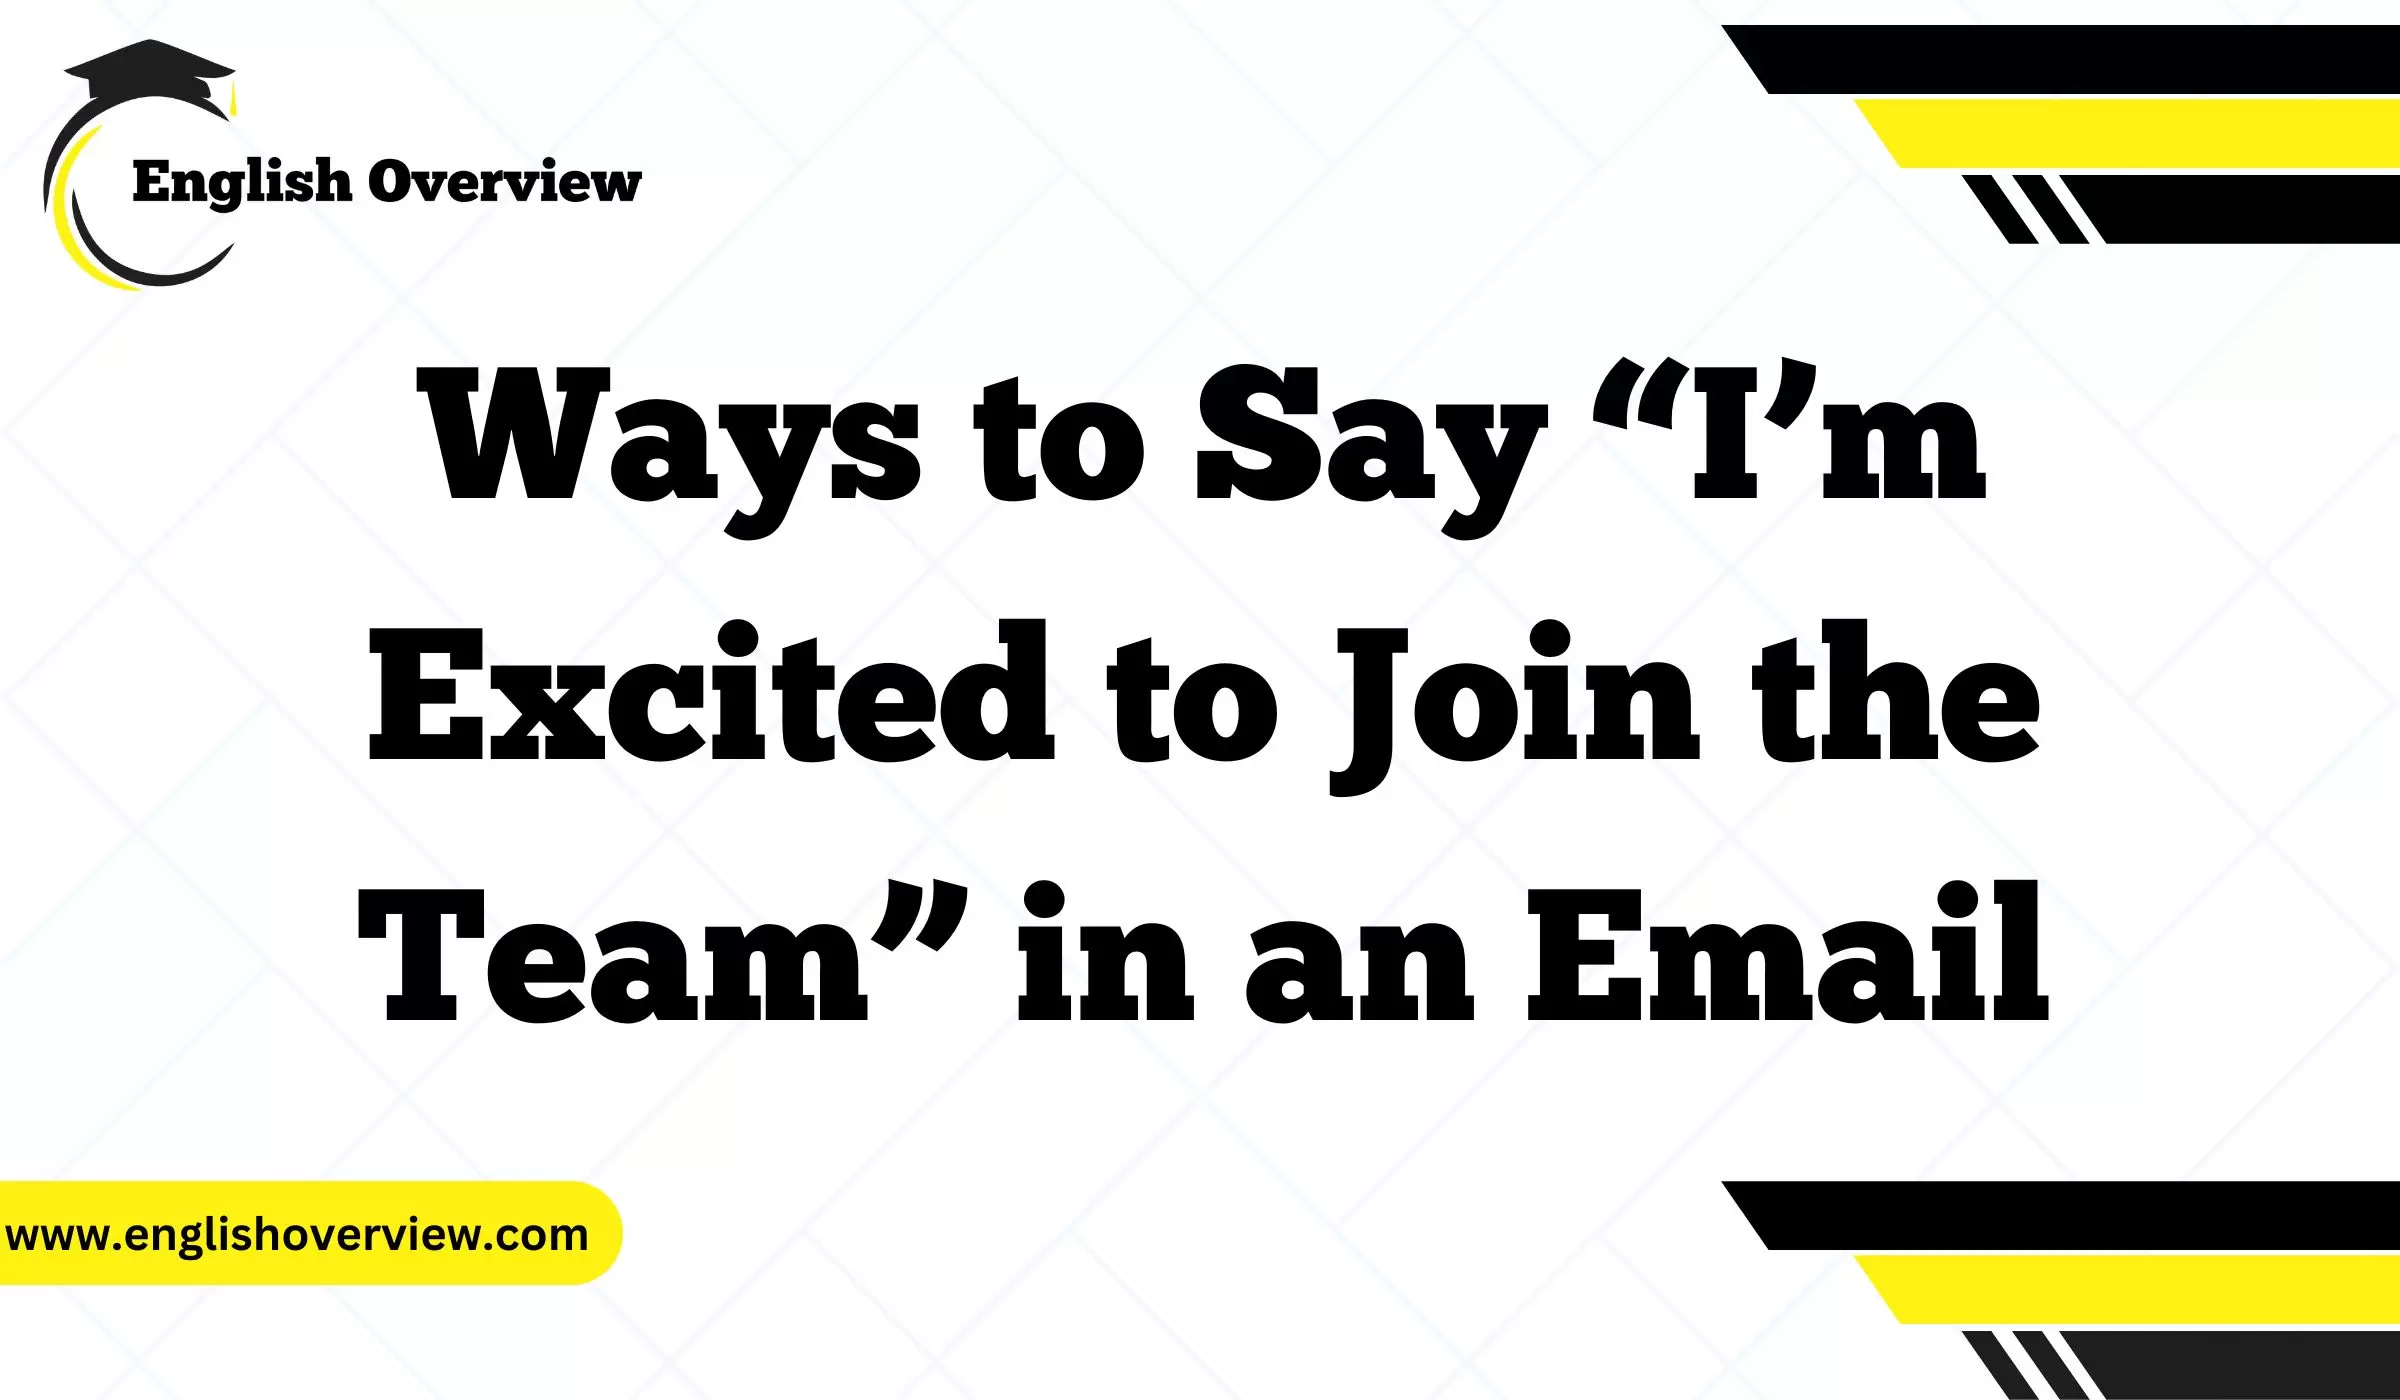 Ways to Say “I’m Excited to Join the Team” in an Email